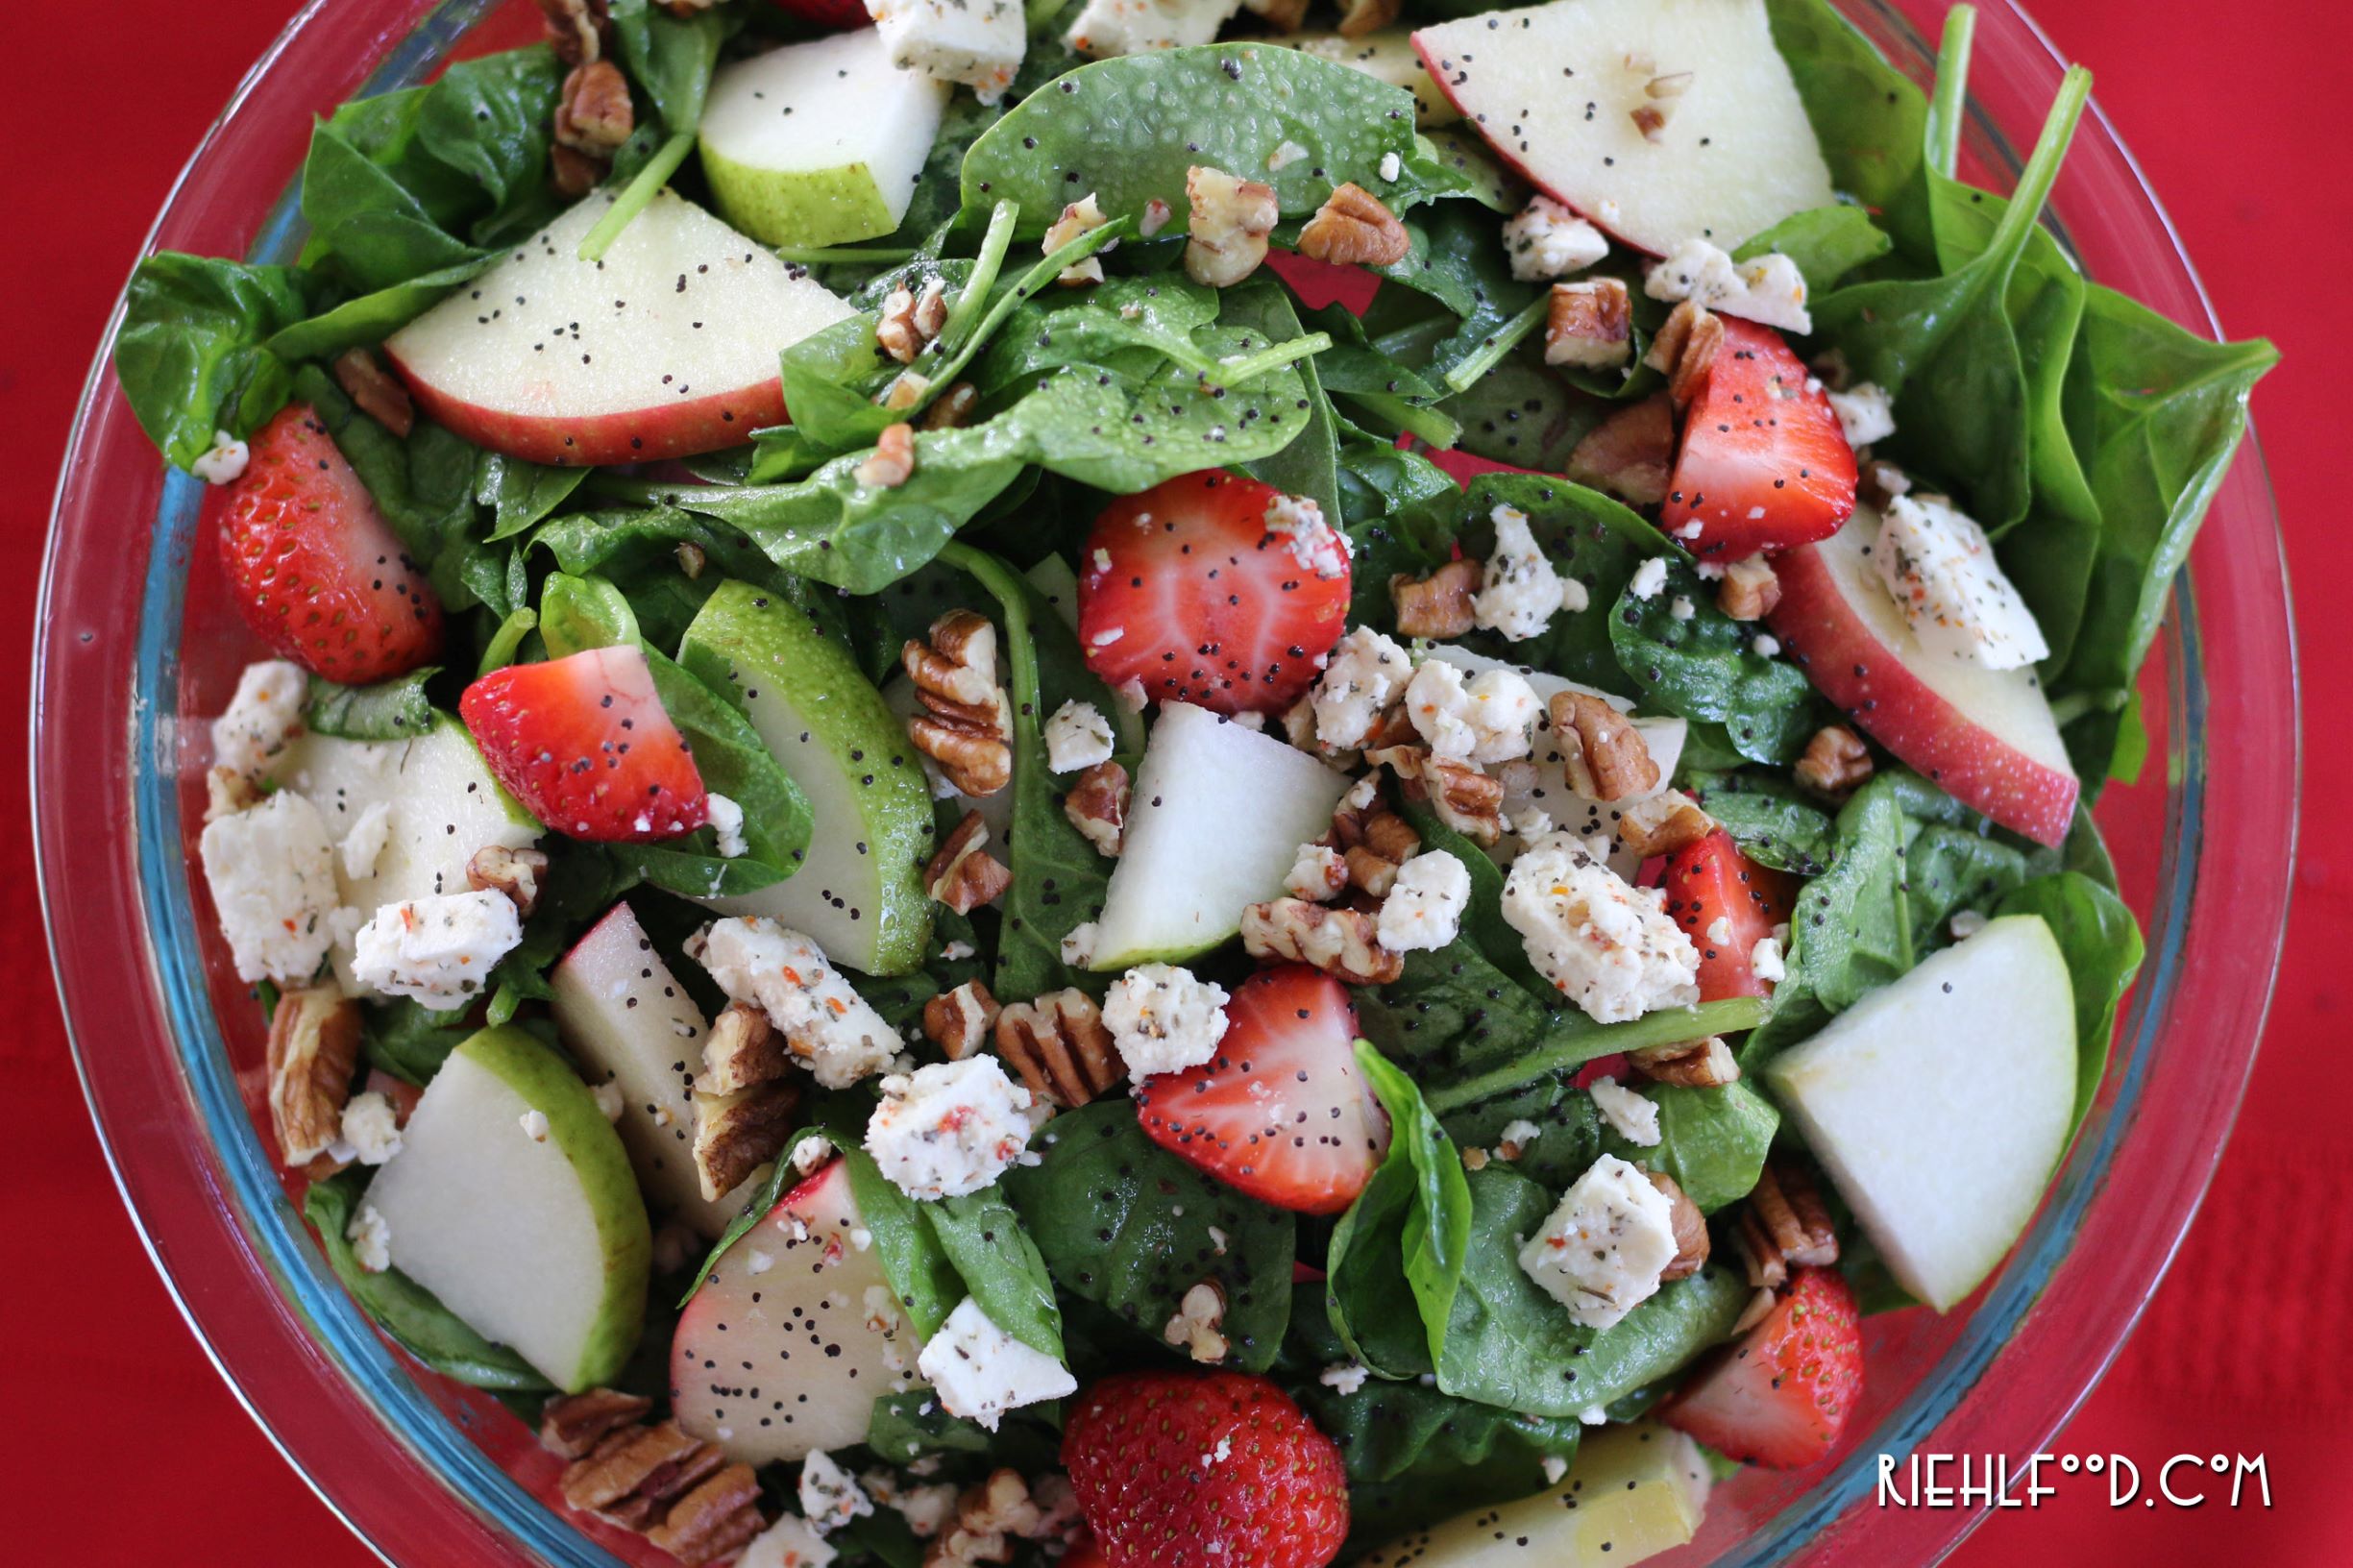 Strawberry, Apple, and Pear Spinach Salad with an Apple Cider Poppy seed Dressing